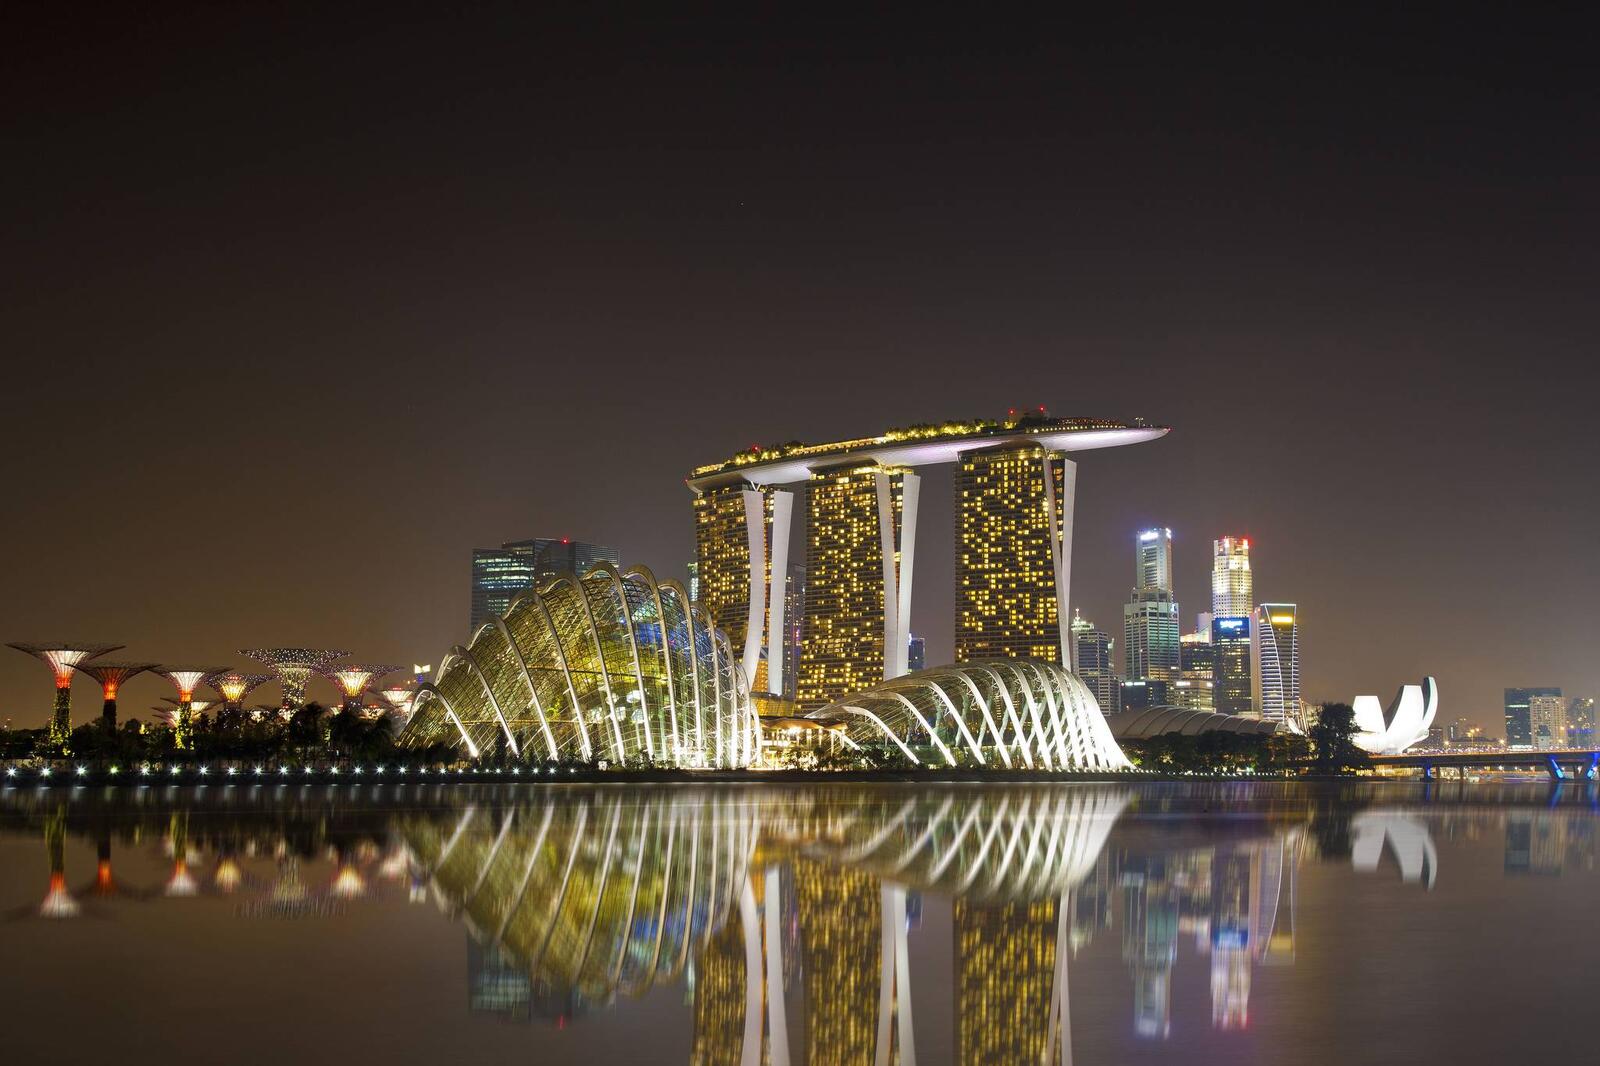 Wallpapers evening Singapore reflection on the desktop